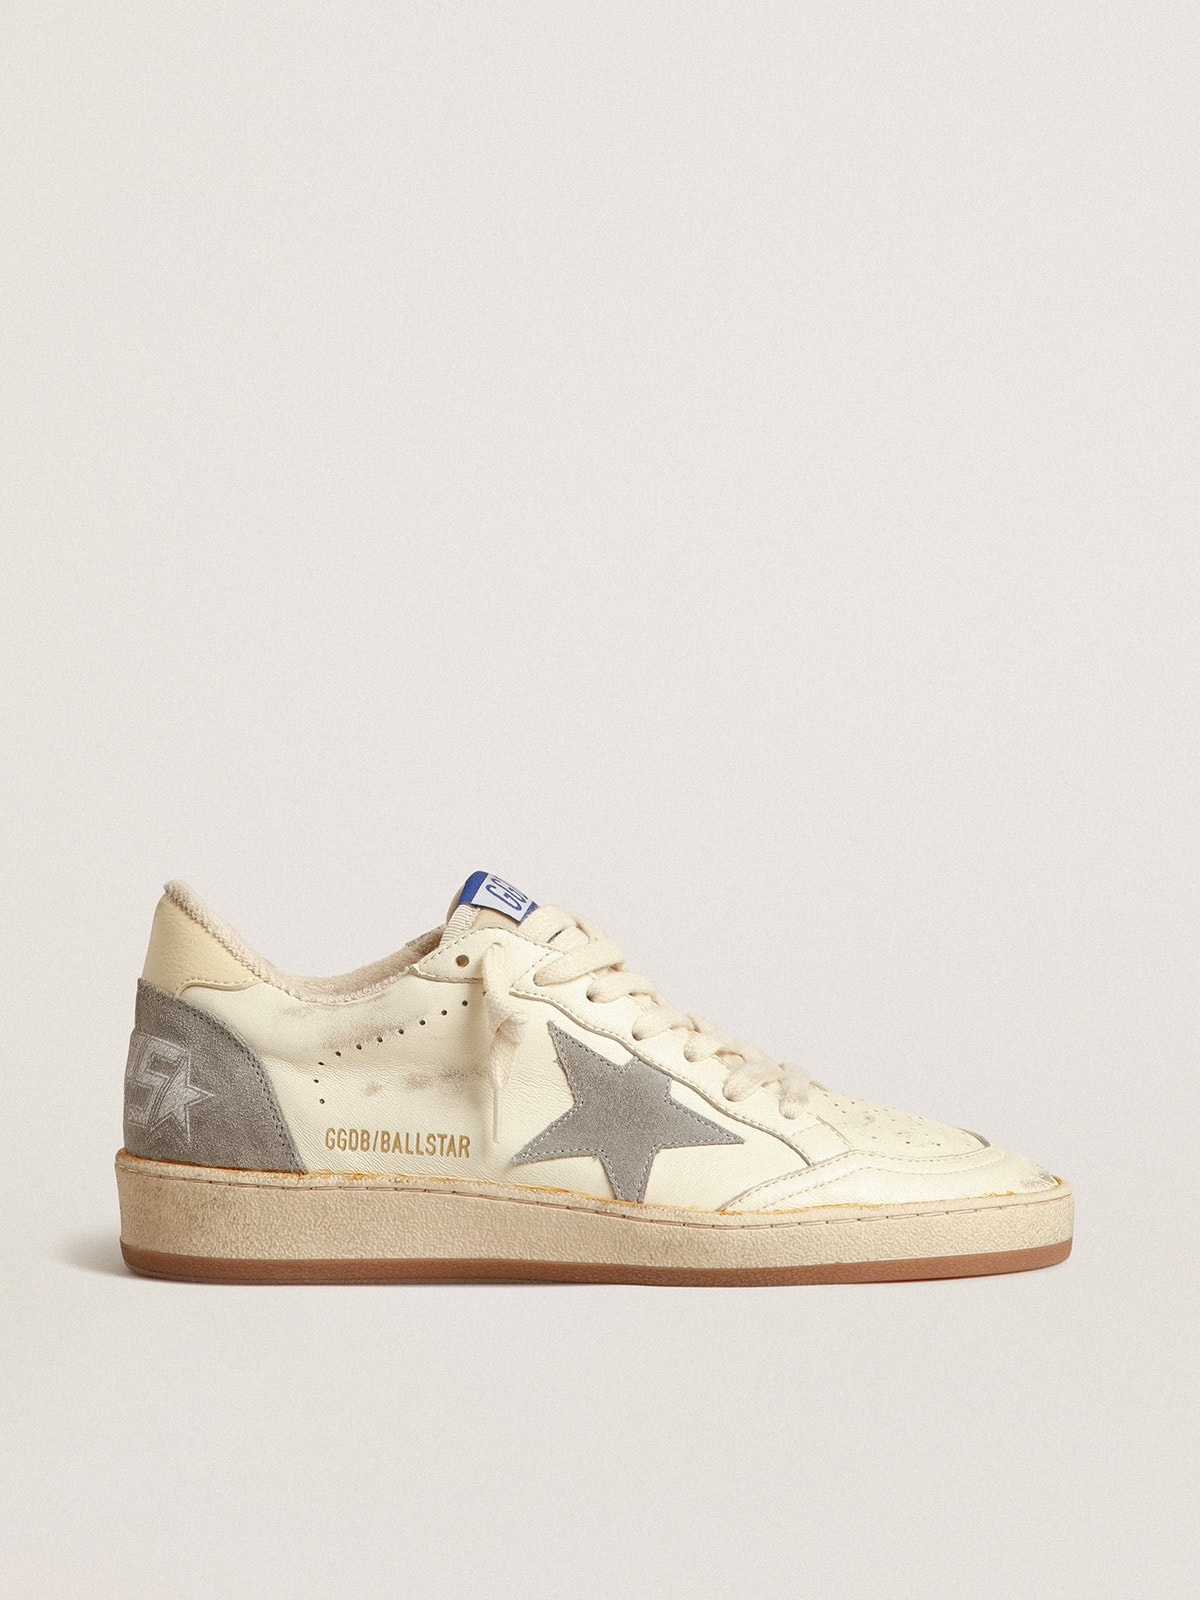 Ball Star in nappa leather with gray suede star and beige heel tab - 1